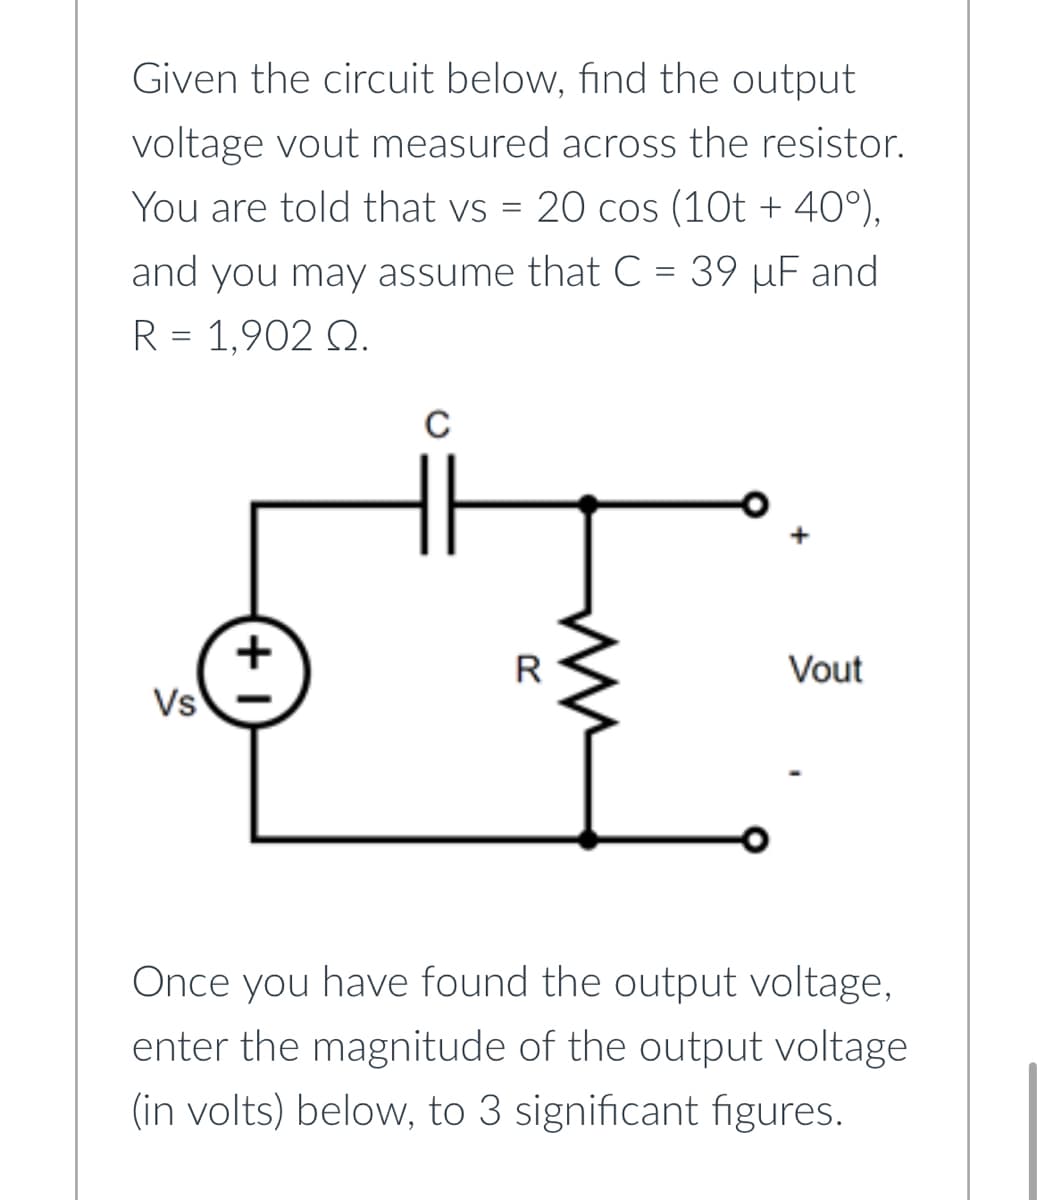 Given the circuit below, find the output
voltage vout measured across the resistor.
You are told that vs = 20 cos (10t + 40°),
and you may assume that C = 39 µF and
R = 1,902 Q.
Vs
+
с
R
Vout
Once you have found the output voltage,
enter the magnitude of the output voltage
(in volts) below, to 3 significant figures.